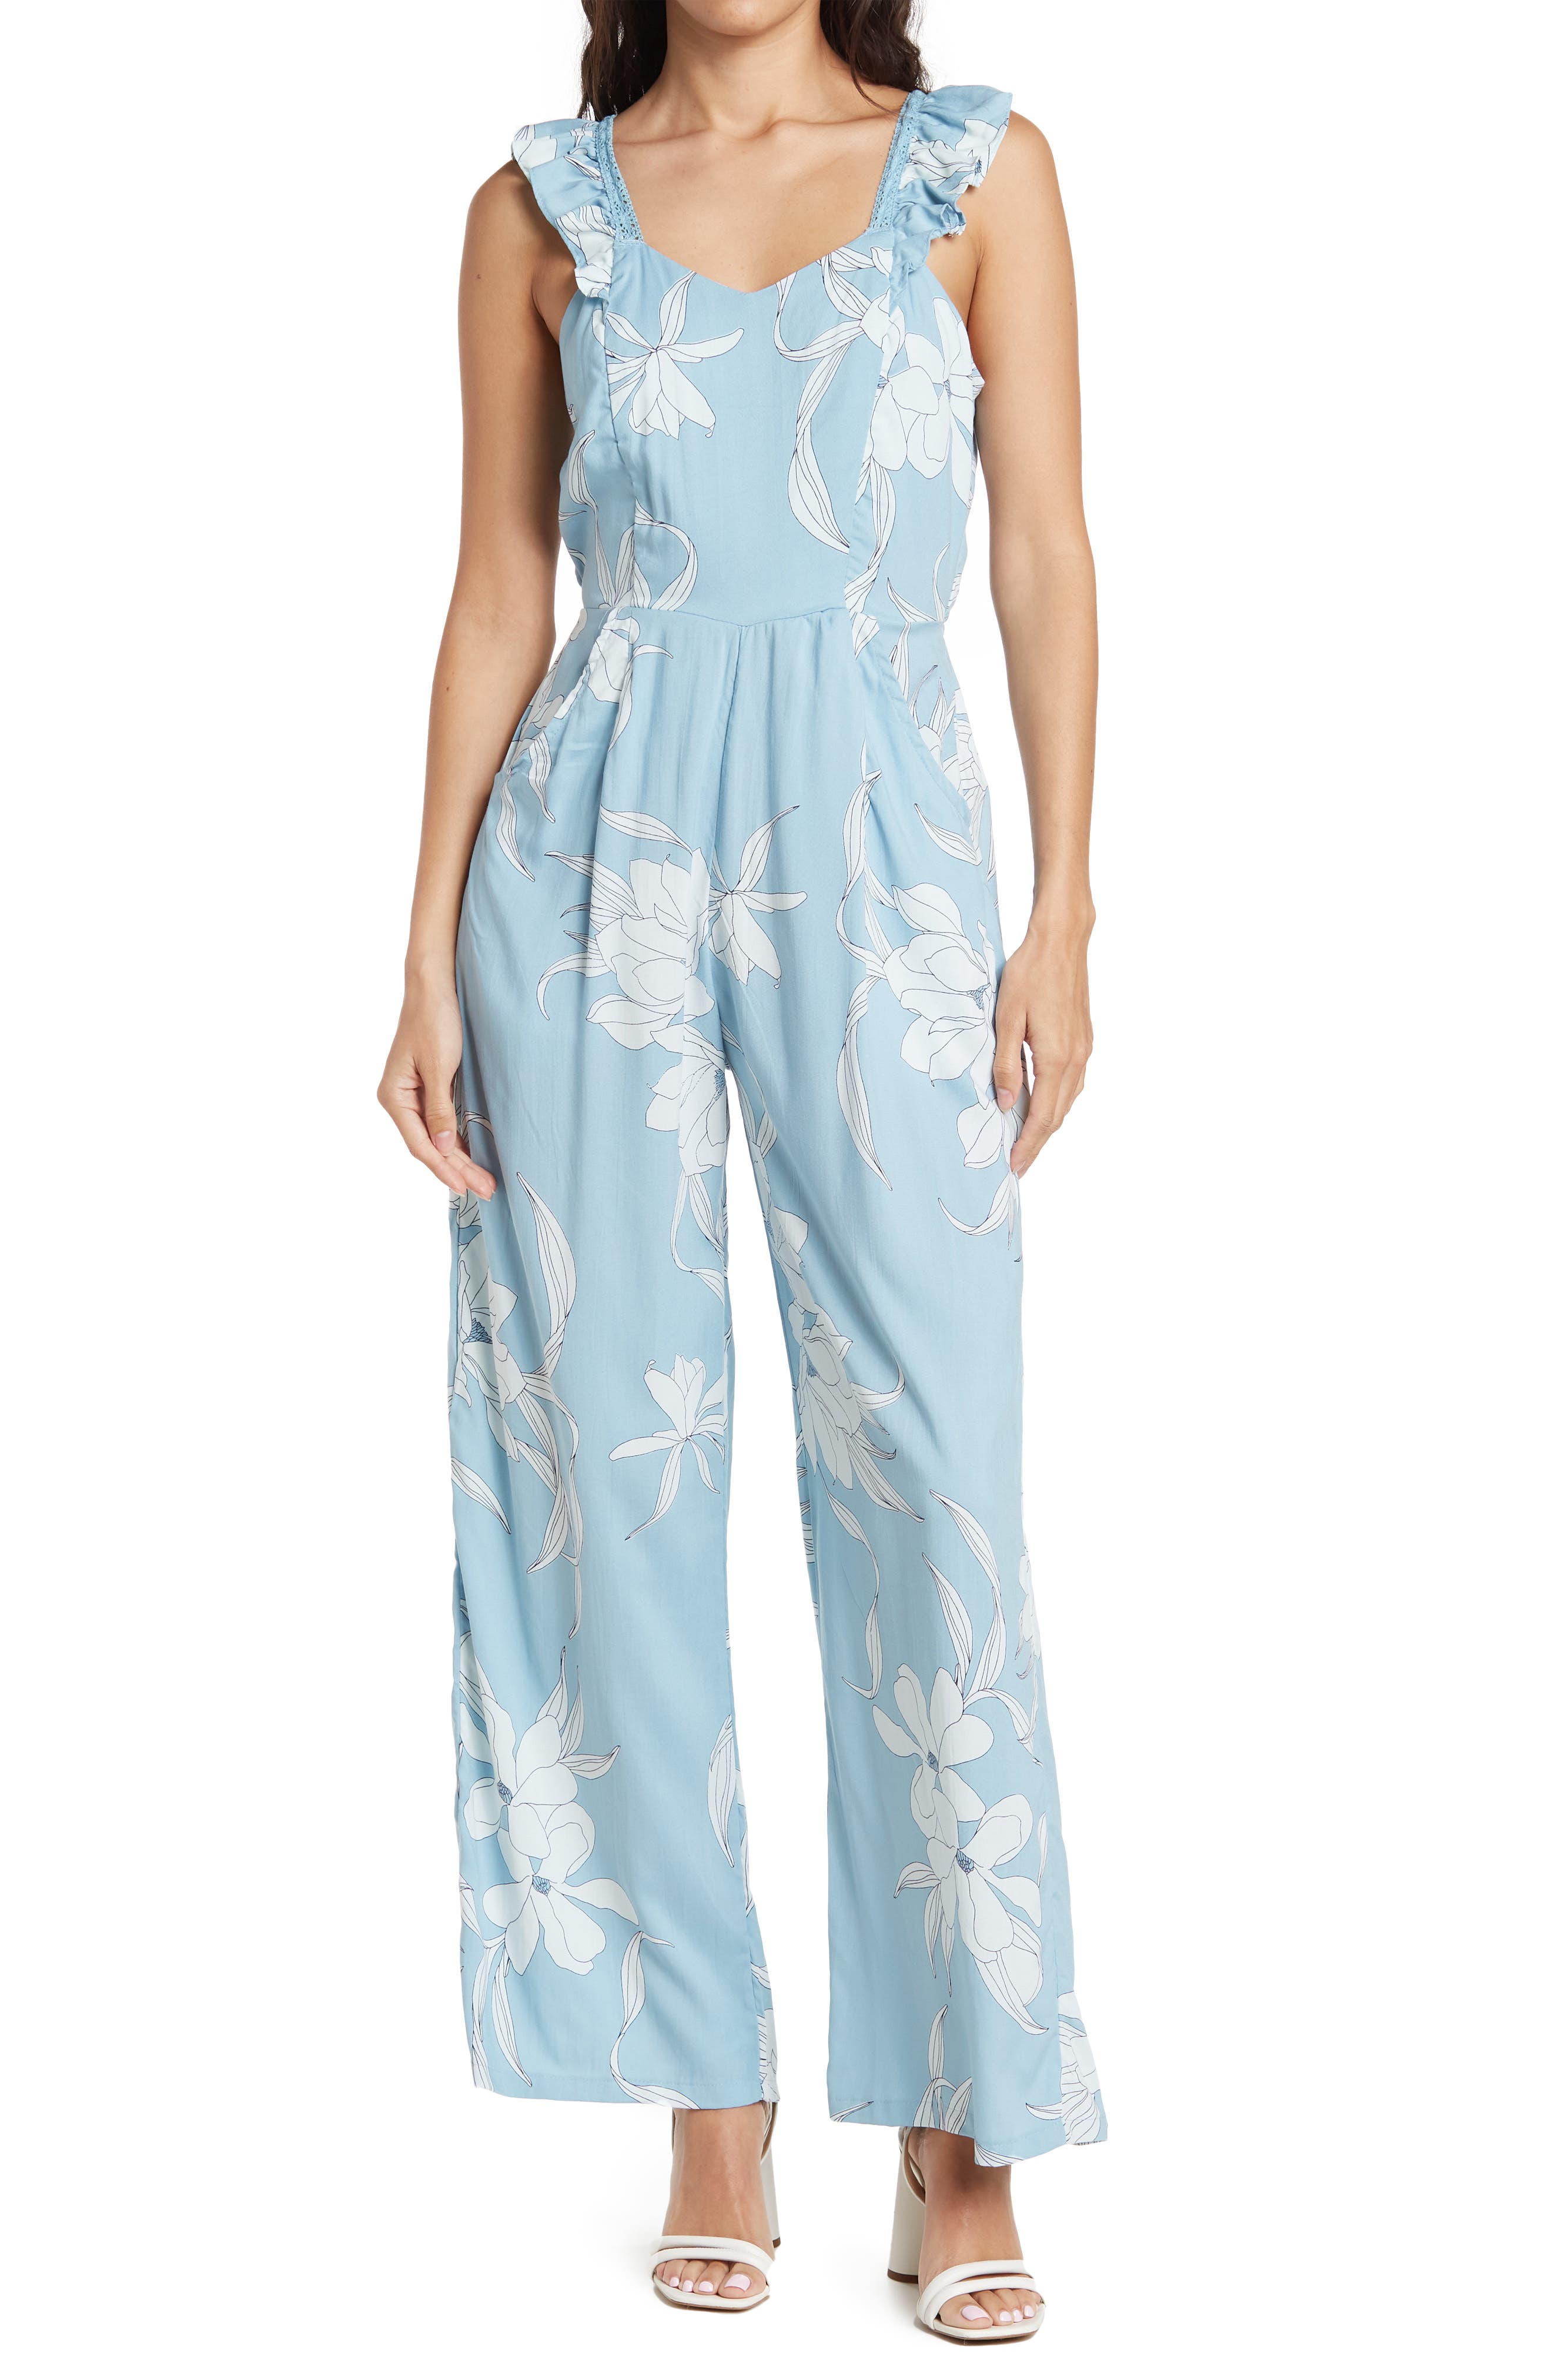 Free People Angela Jumpsuit in Yellow Womens Clothing Jumpsuits and rompers Full-length jumpsuits and rompers 